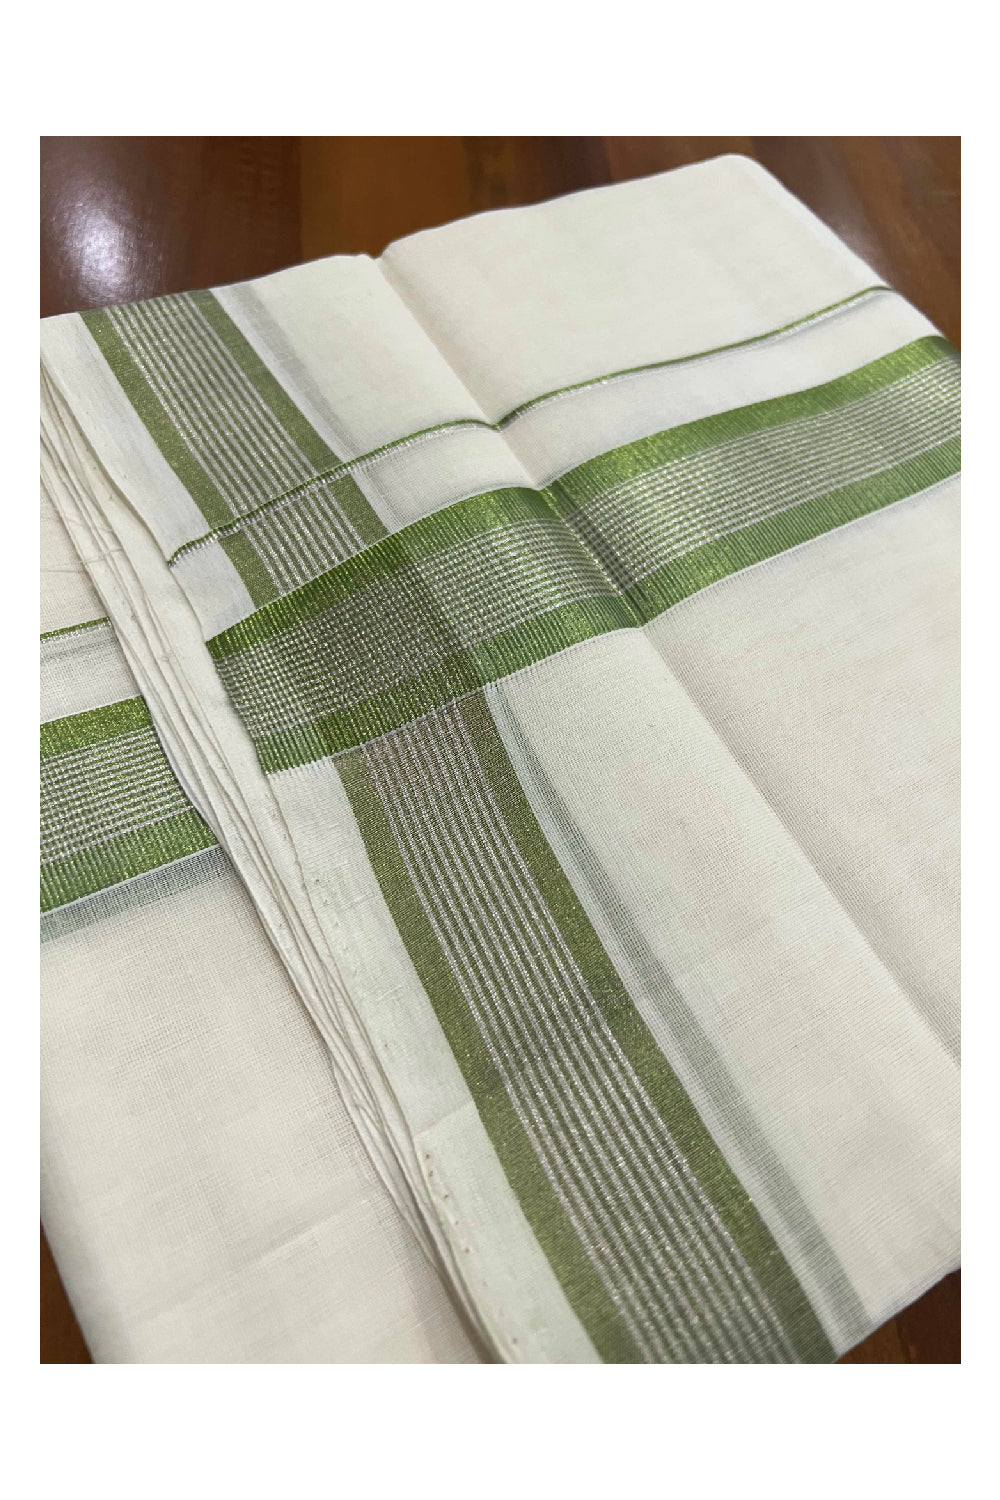 Southloom Kuthampully Pure Cotton Handloom Mundu with Silver and Green Kasavu Lines Border